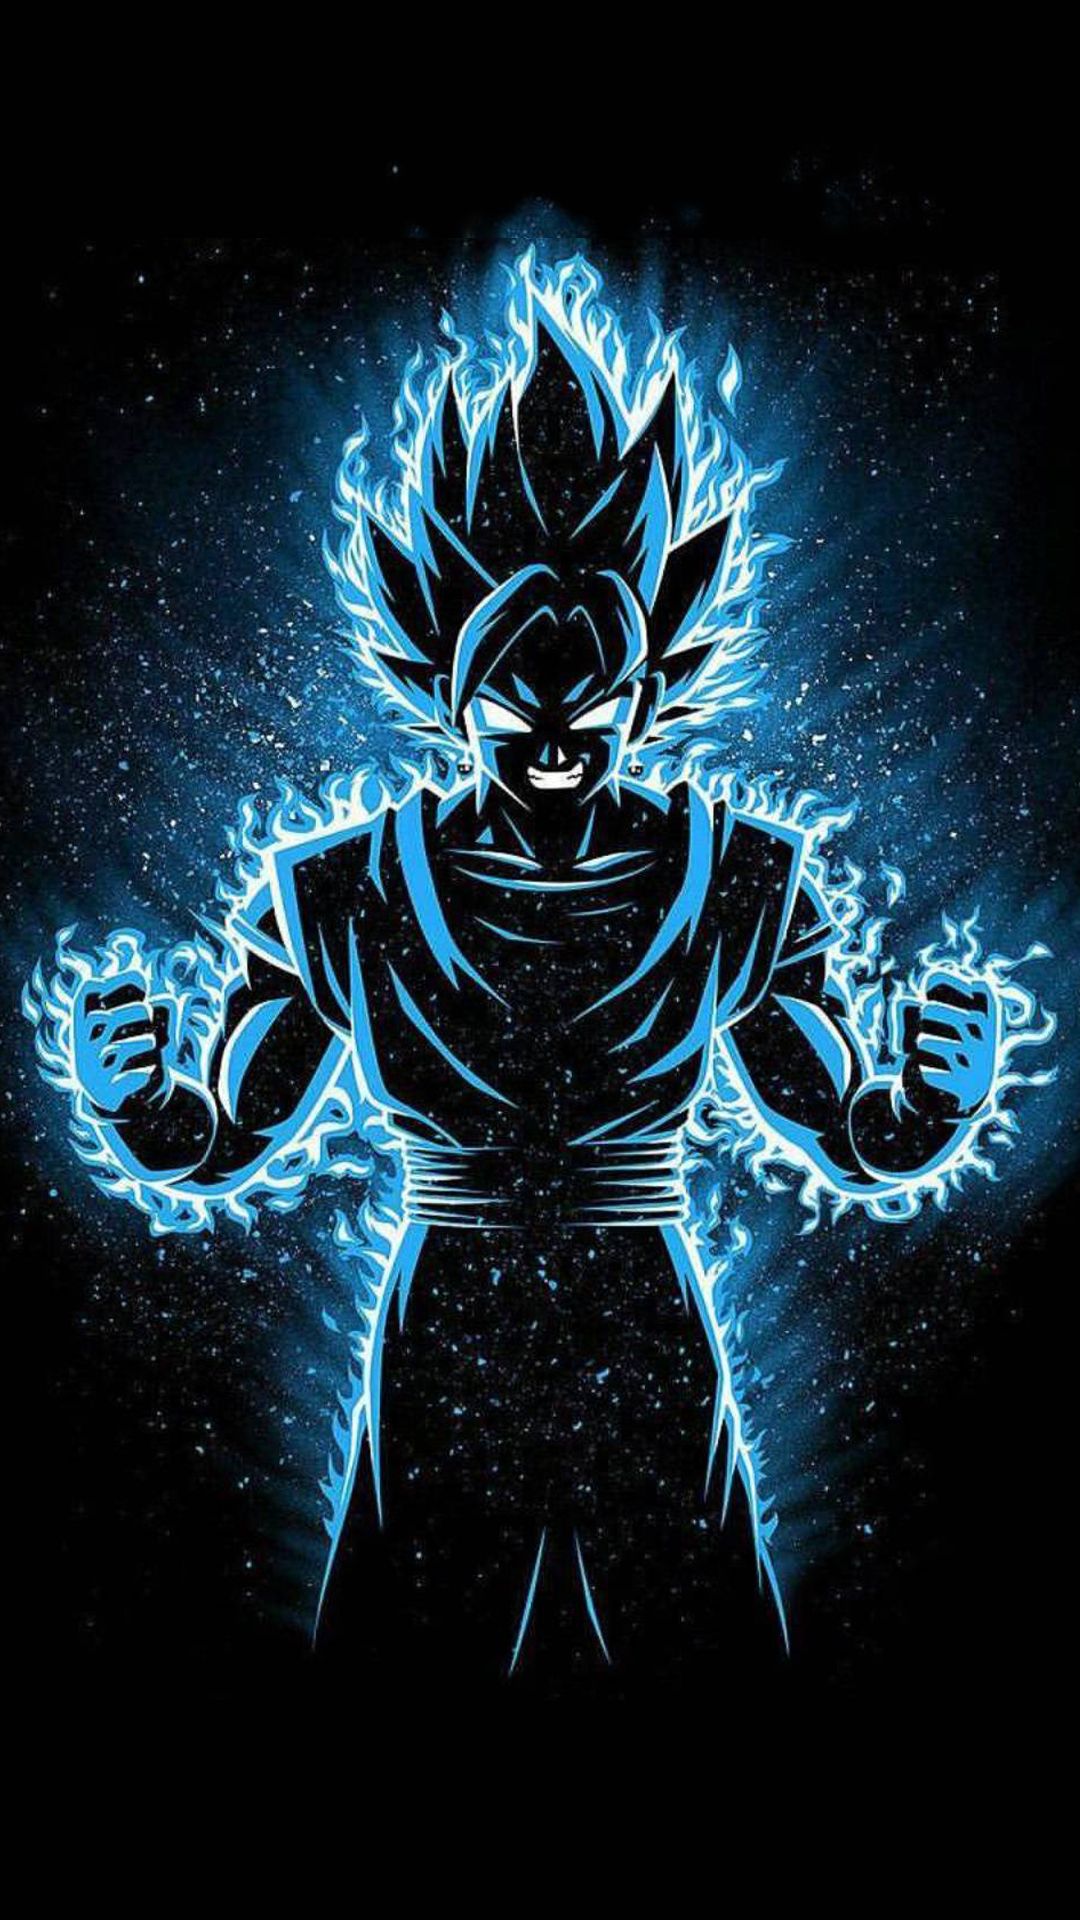 Dragon Ball Z Weed Wallpapers on